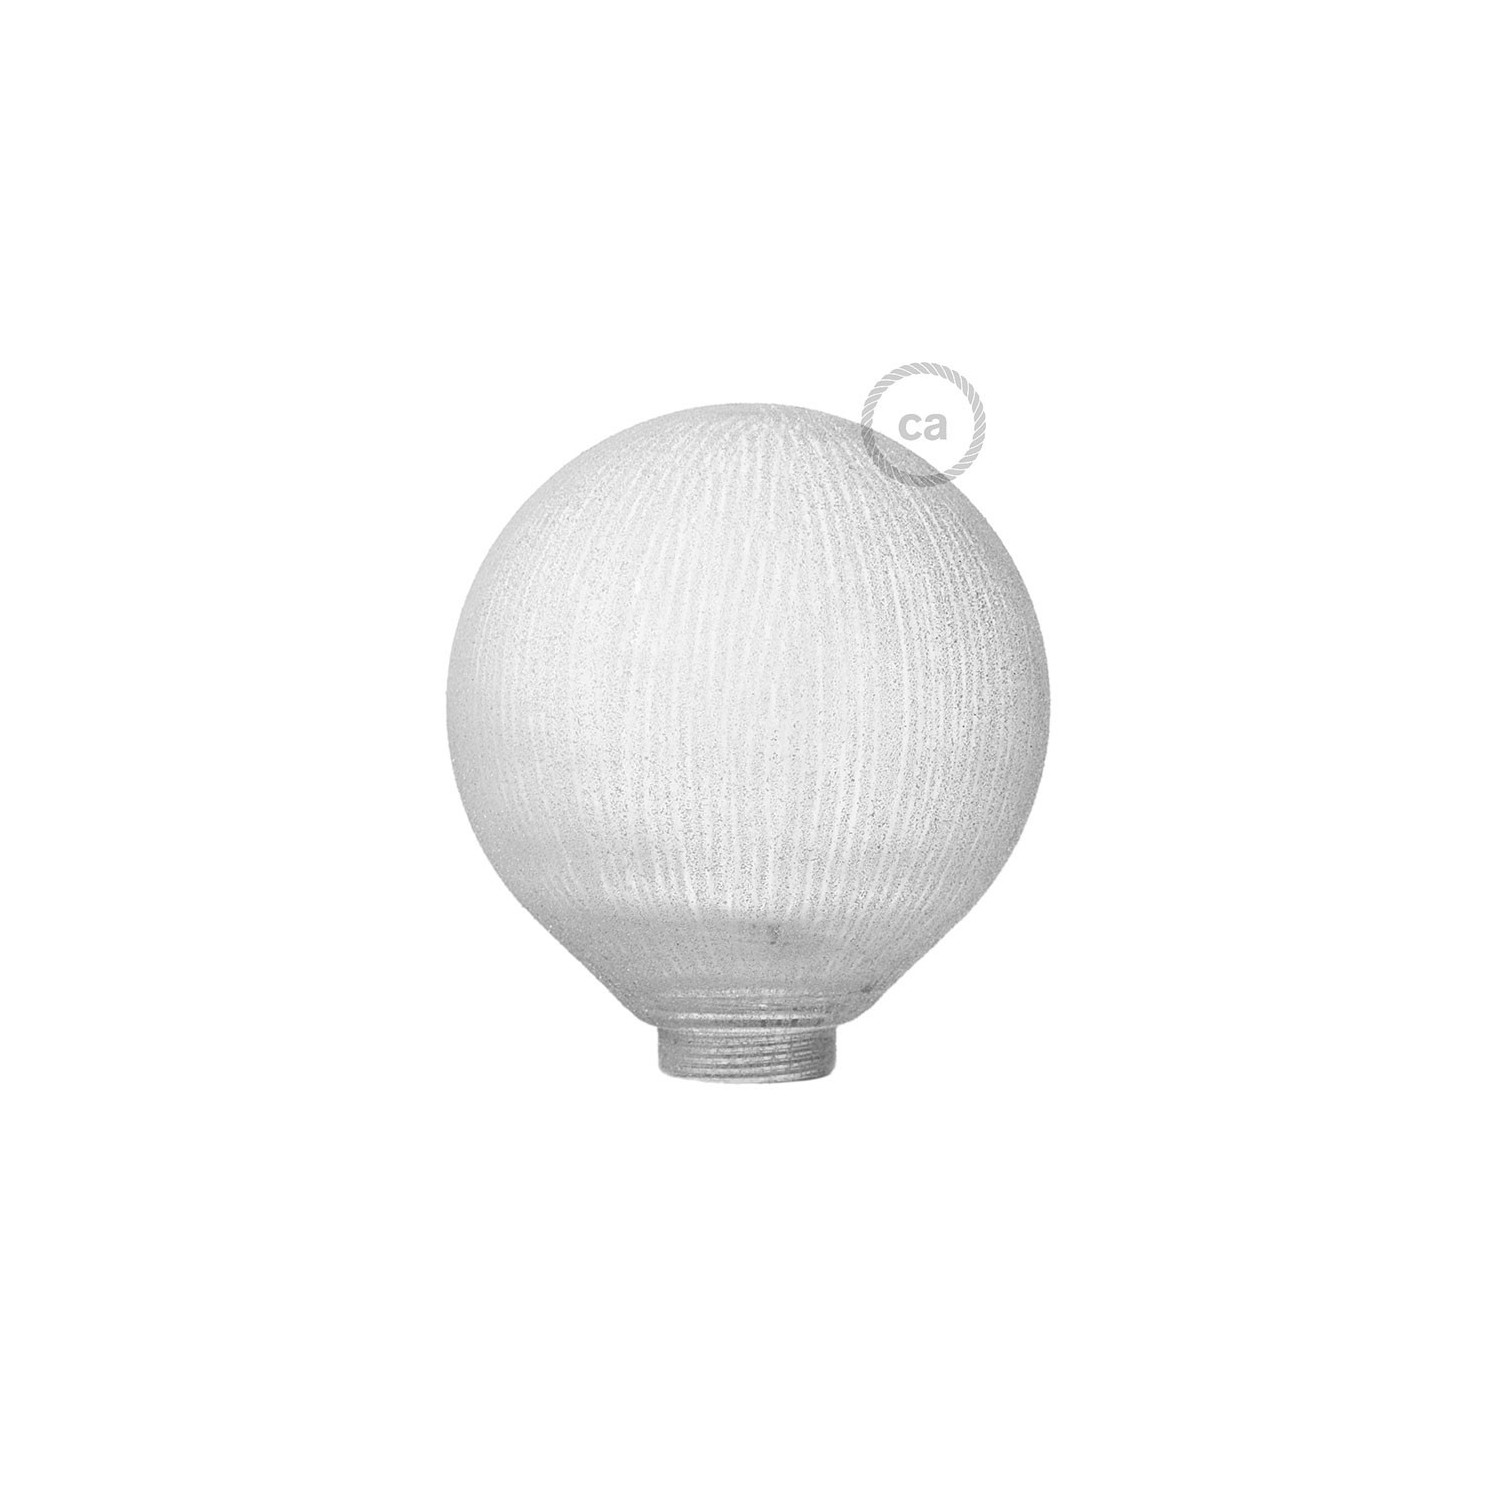 Bulb for modular decorative light bulb G125 White with Vertical lines